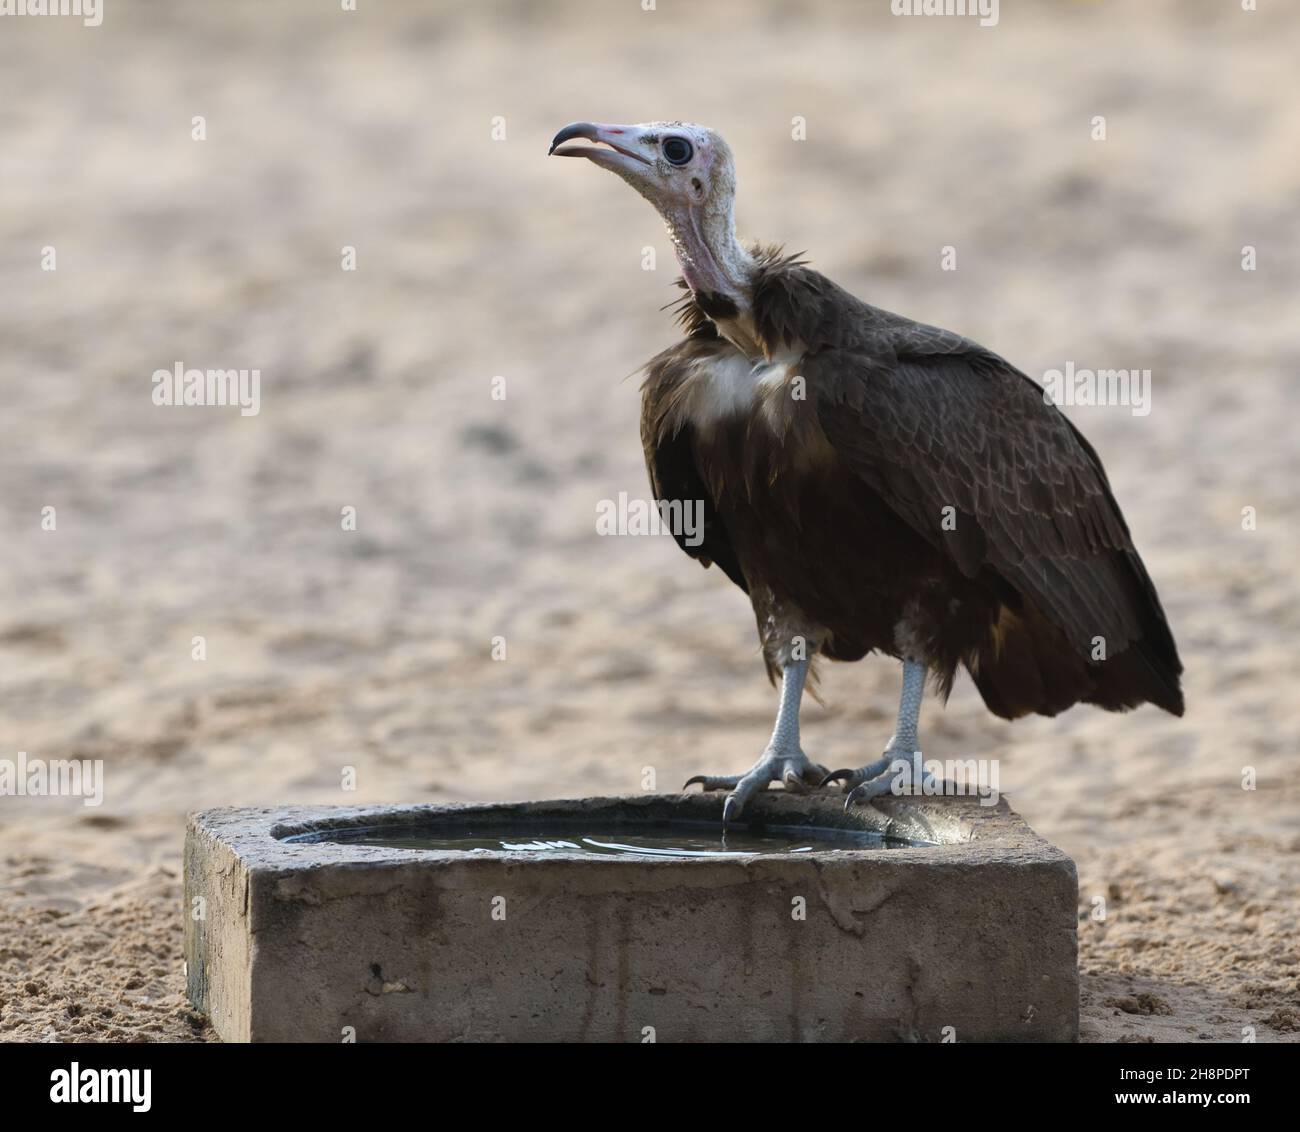 A  hooded vulture (Necrosyrtes monachus) comes to drink at the Kartong Bird Observatory. Kartong,  The Republic of the Gambia. Stock Photo